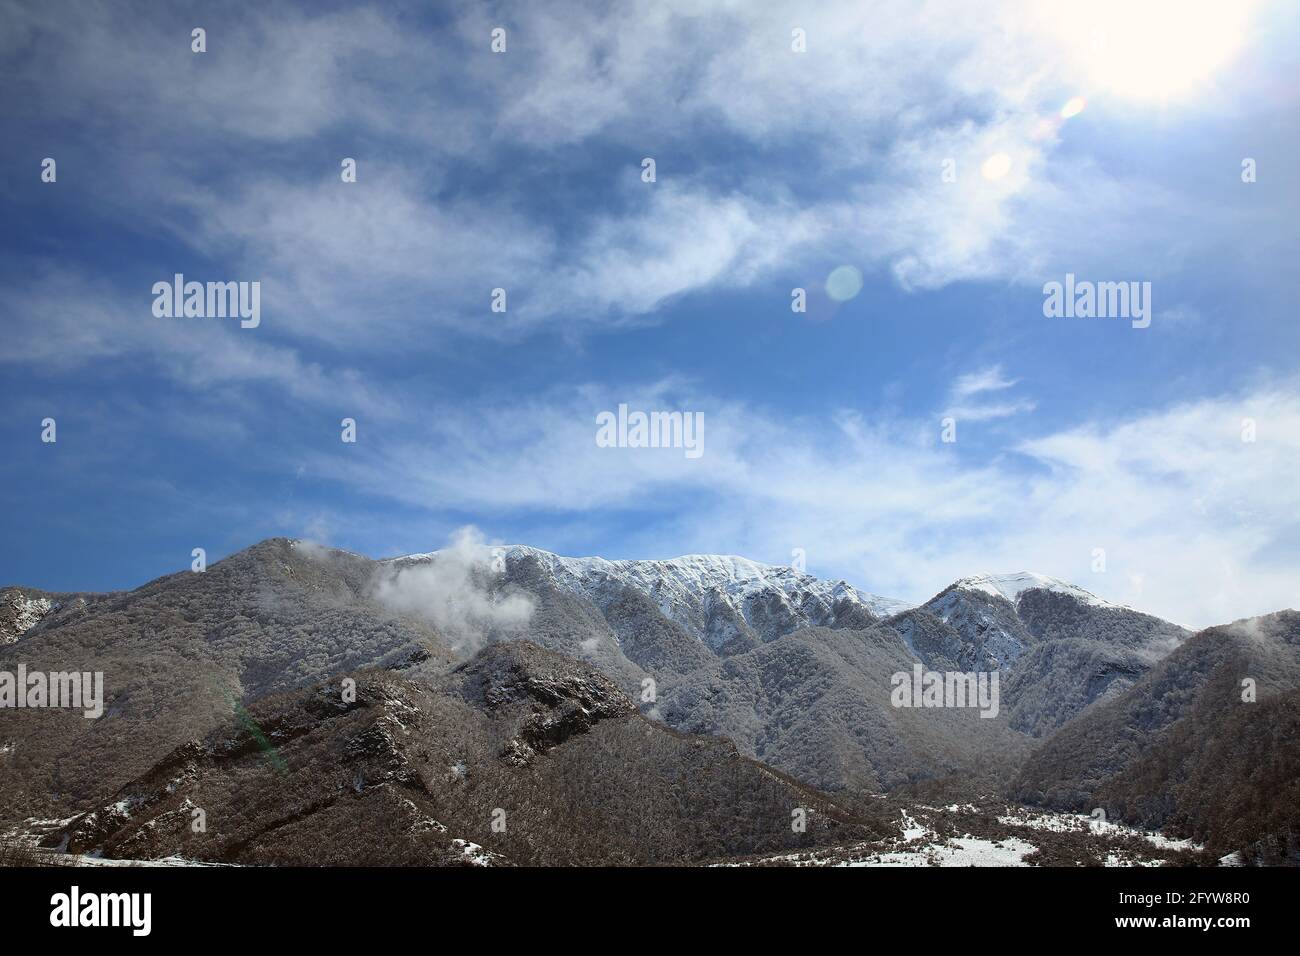 It snowed in the village . The leaves of the trees fell on the mountain . It snowed in the mountains and in the village . Bash Dashagil village of Ogu Stock Photo